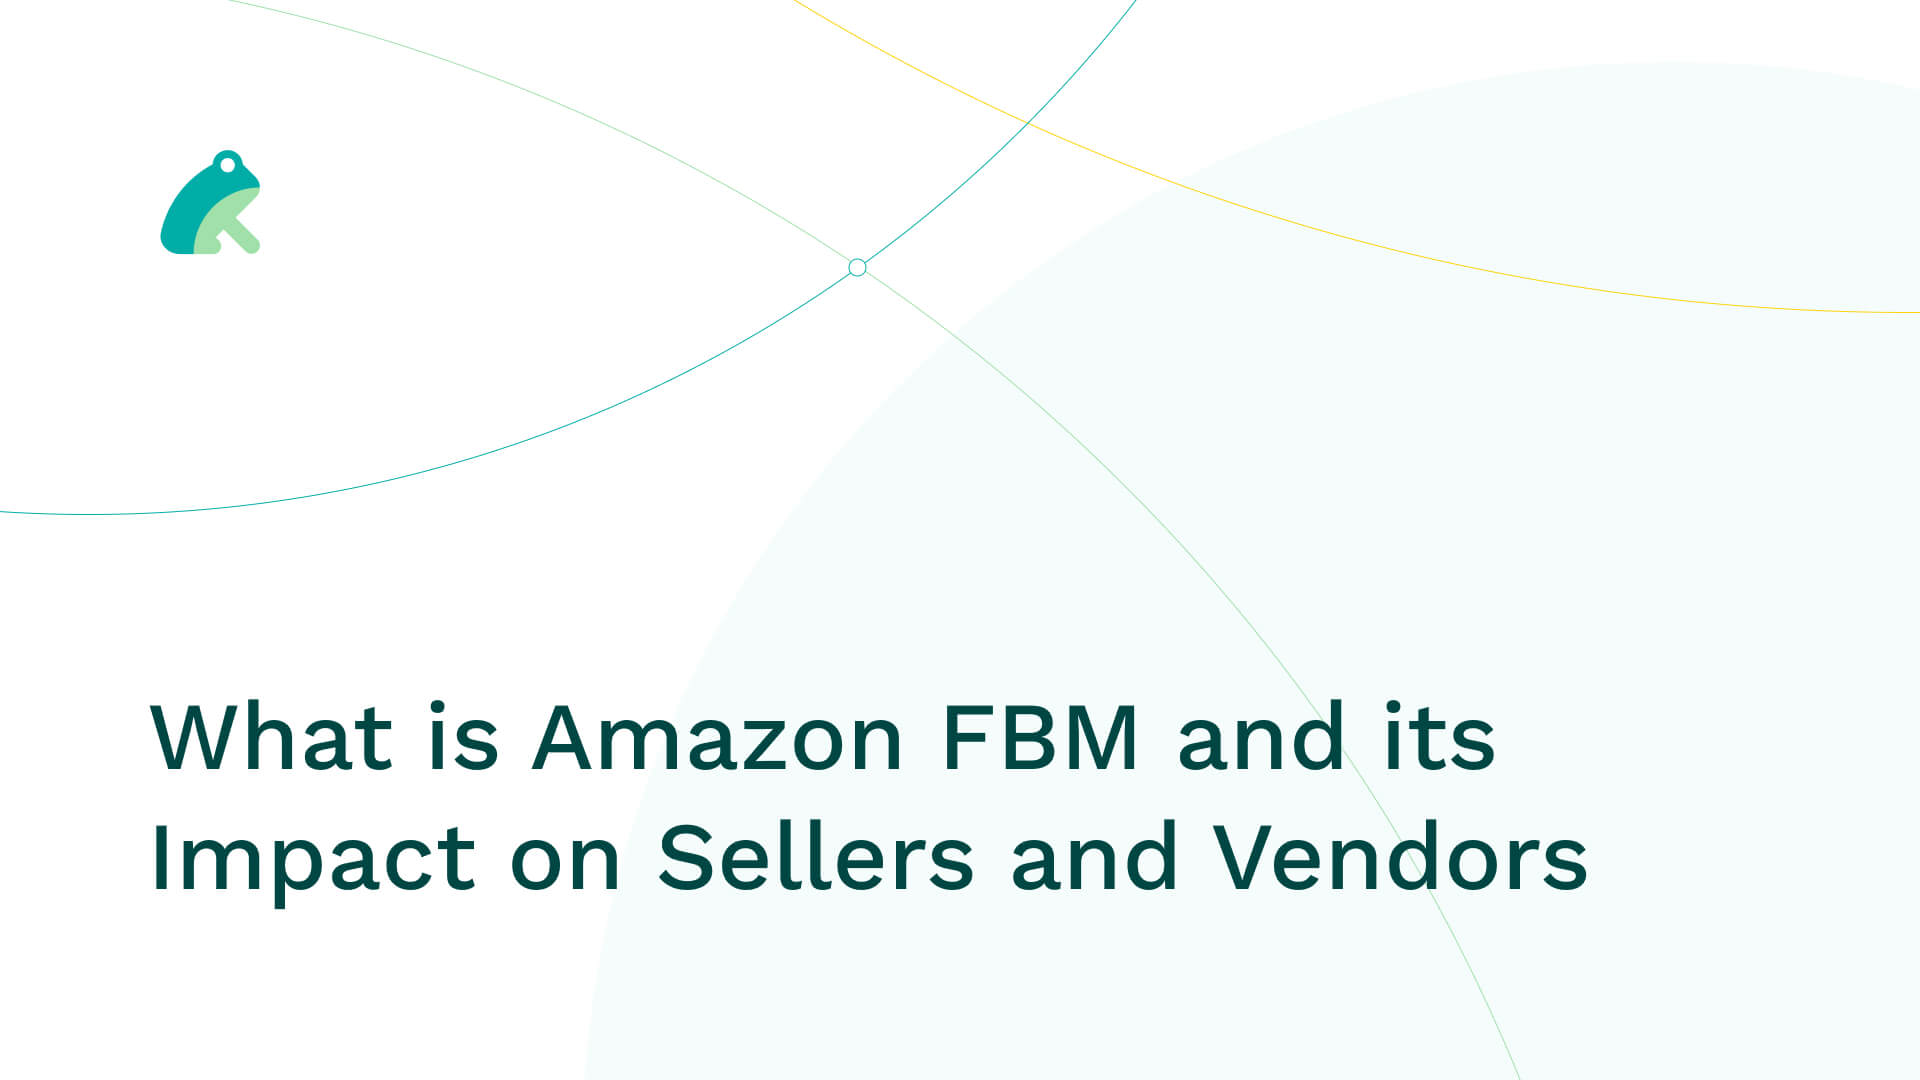 What is Amazon FBM and its Impact on Sellers and Vendors